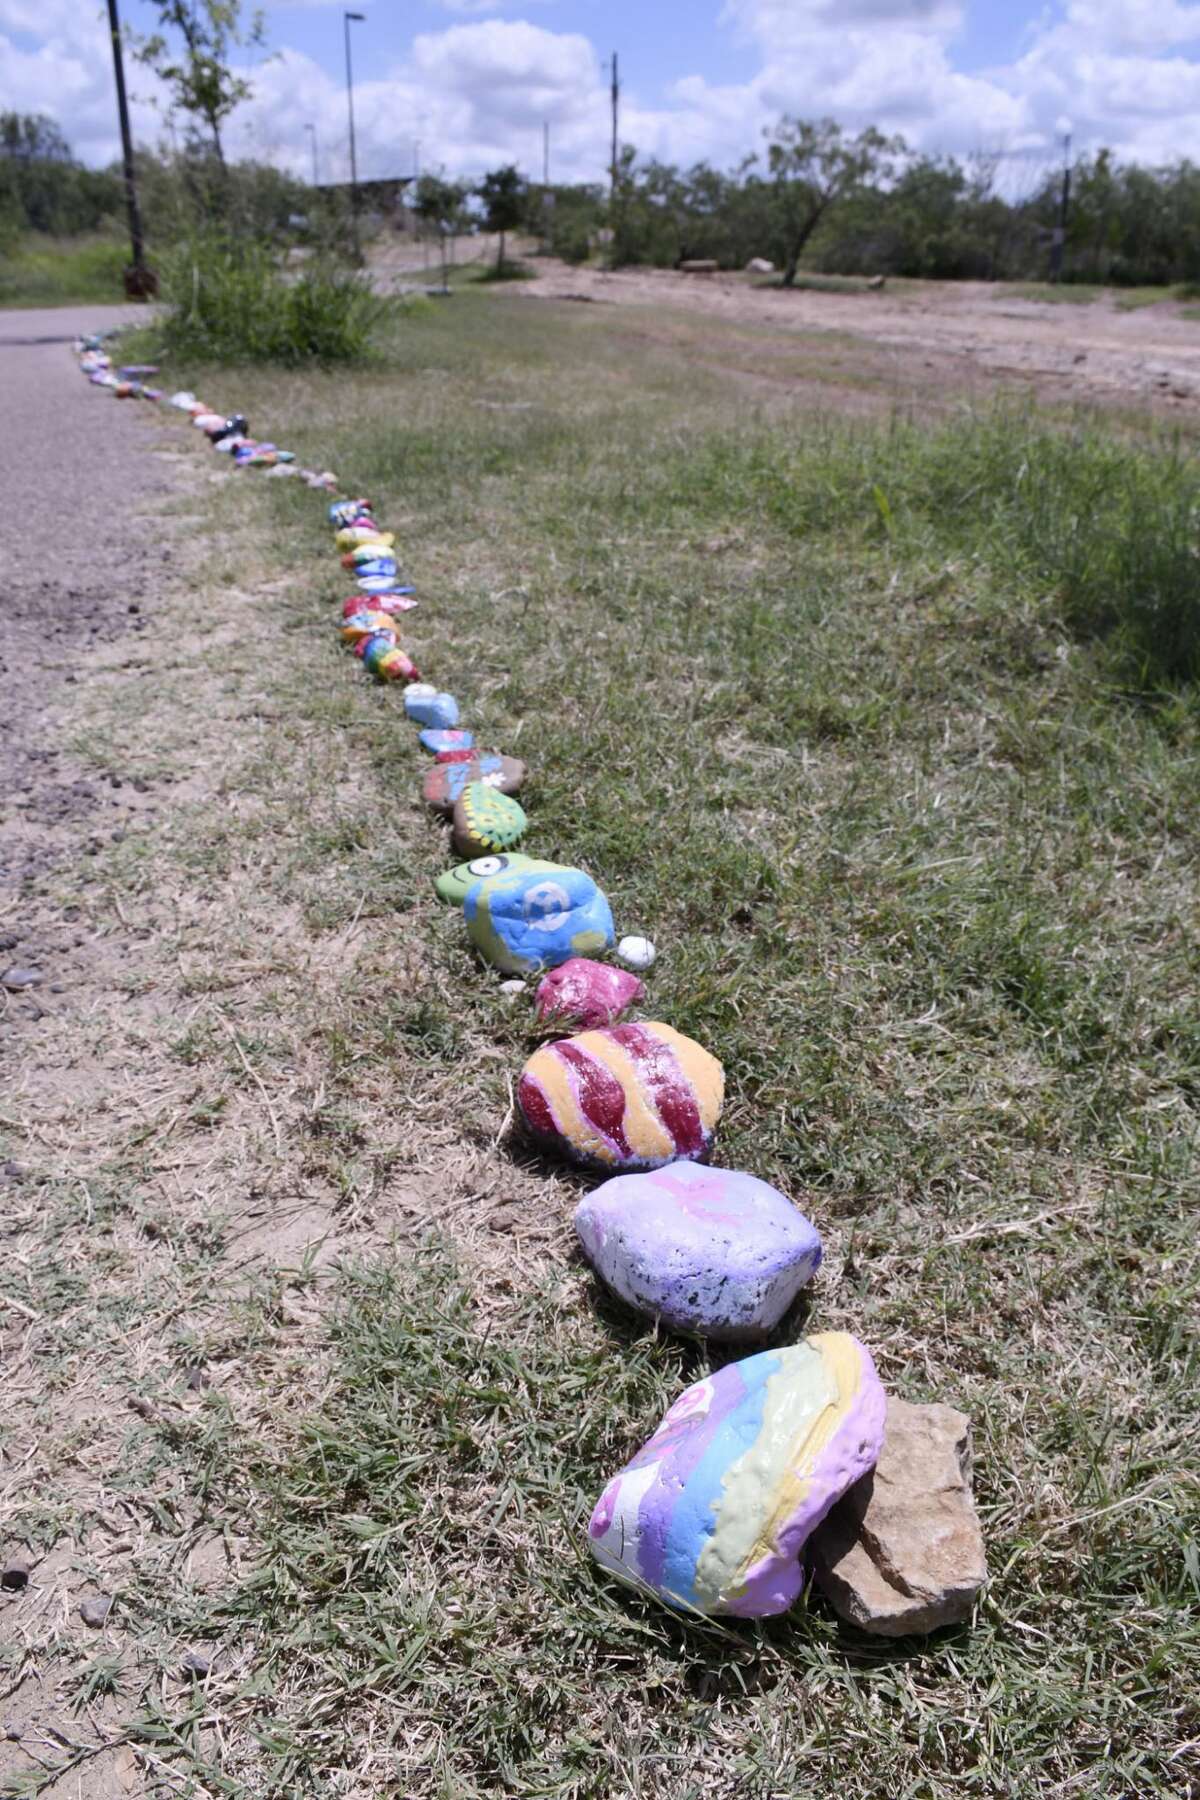 Visitors to North Central Park and other parks throughout Laredo have noticed the COVID-19 Snake, a collection of hand painted rocks lined up as a snake where participants can express their thoughts and show off their artistic talent. The project was started on June 3, 2020 by Once Upon A Rockk, a group for rock lovers.People are asked to hand paint their own rock and add it to the snake in their park.